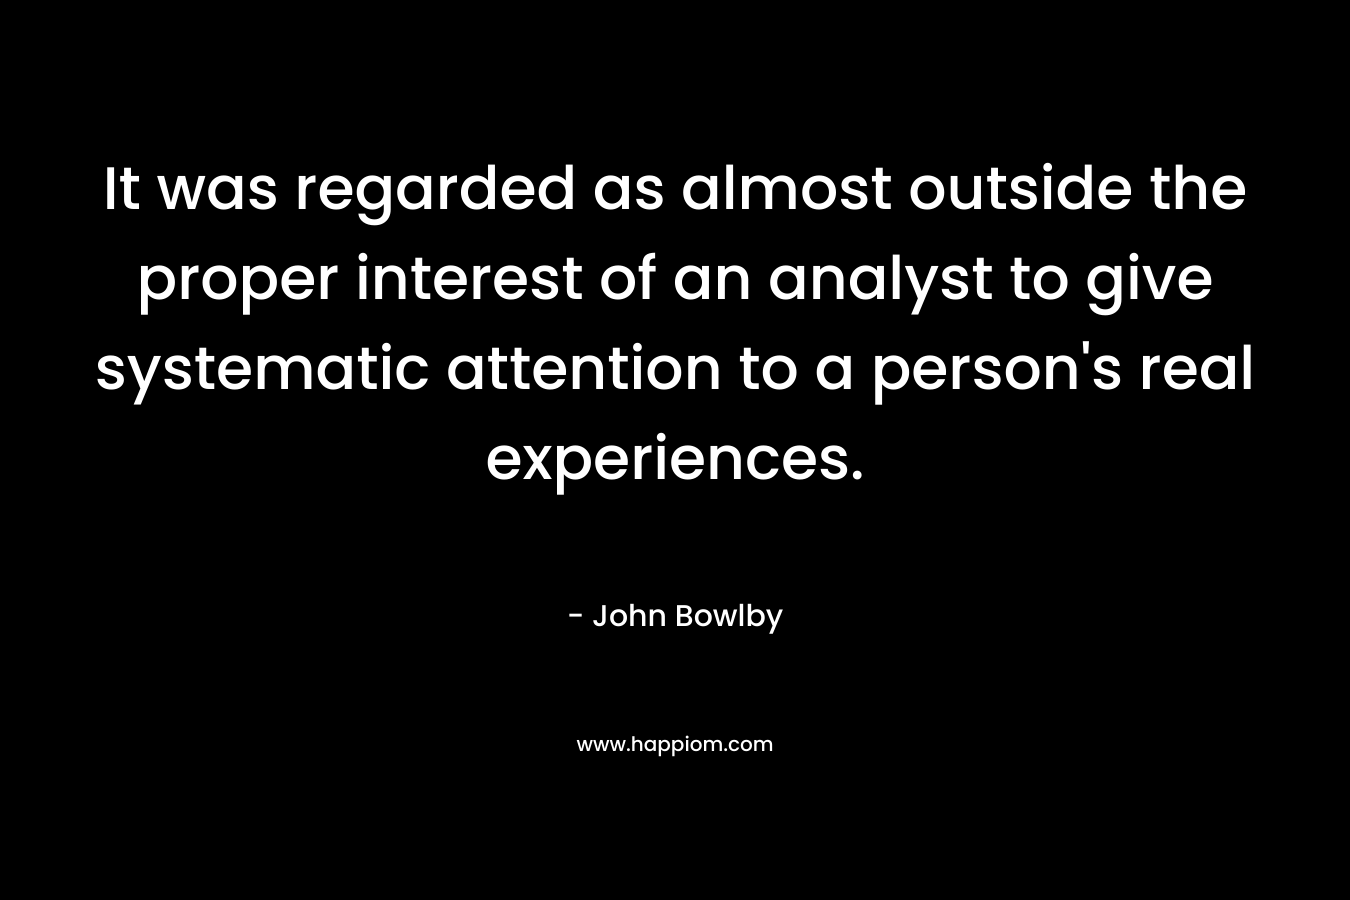 It was regarded as almost outside the proper interest of an analyst to give systematic attention to a person's real experiences.